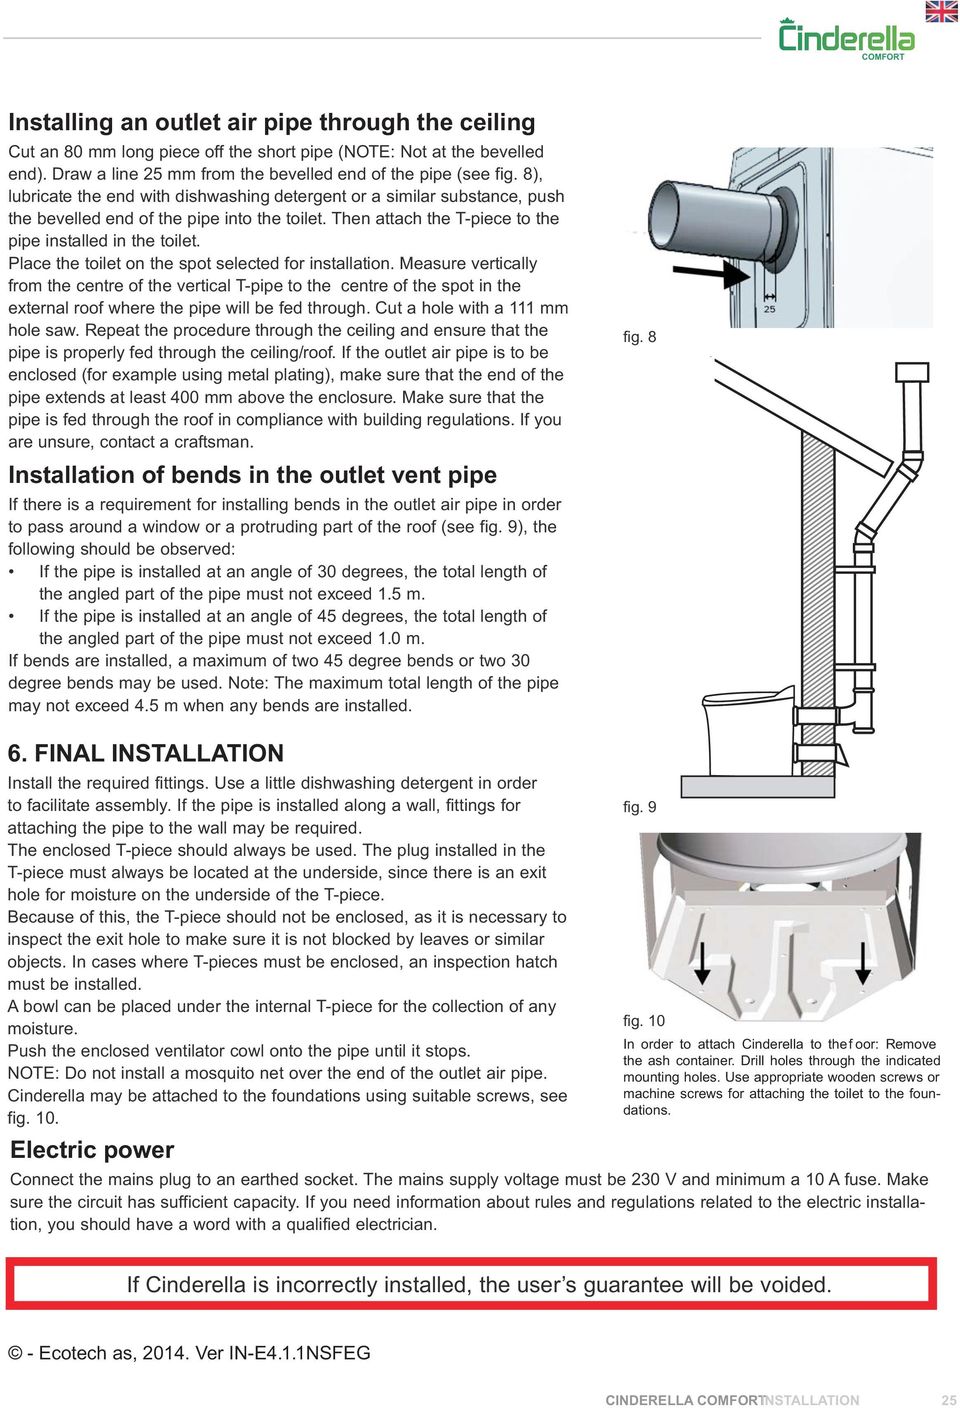 Place the toilet on the spot selected for installation. Measure vertically from the centre of the vertical T-pipe to the centre of the spot in the external roof where the pipe will be fed through.